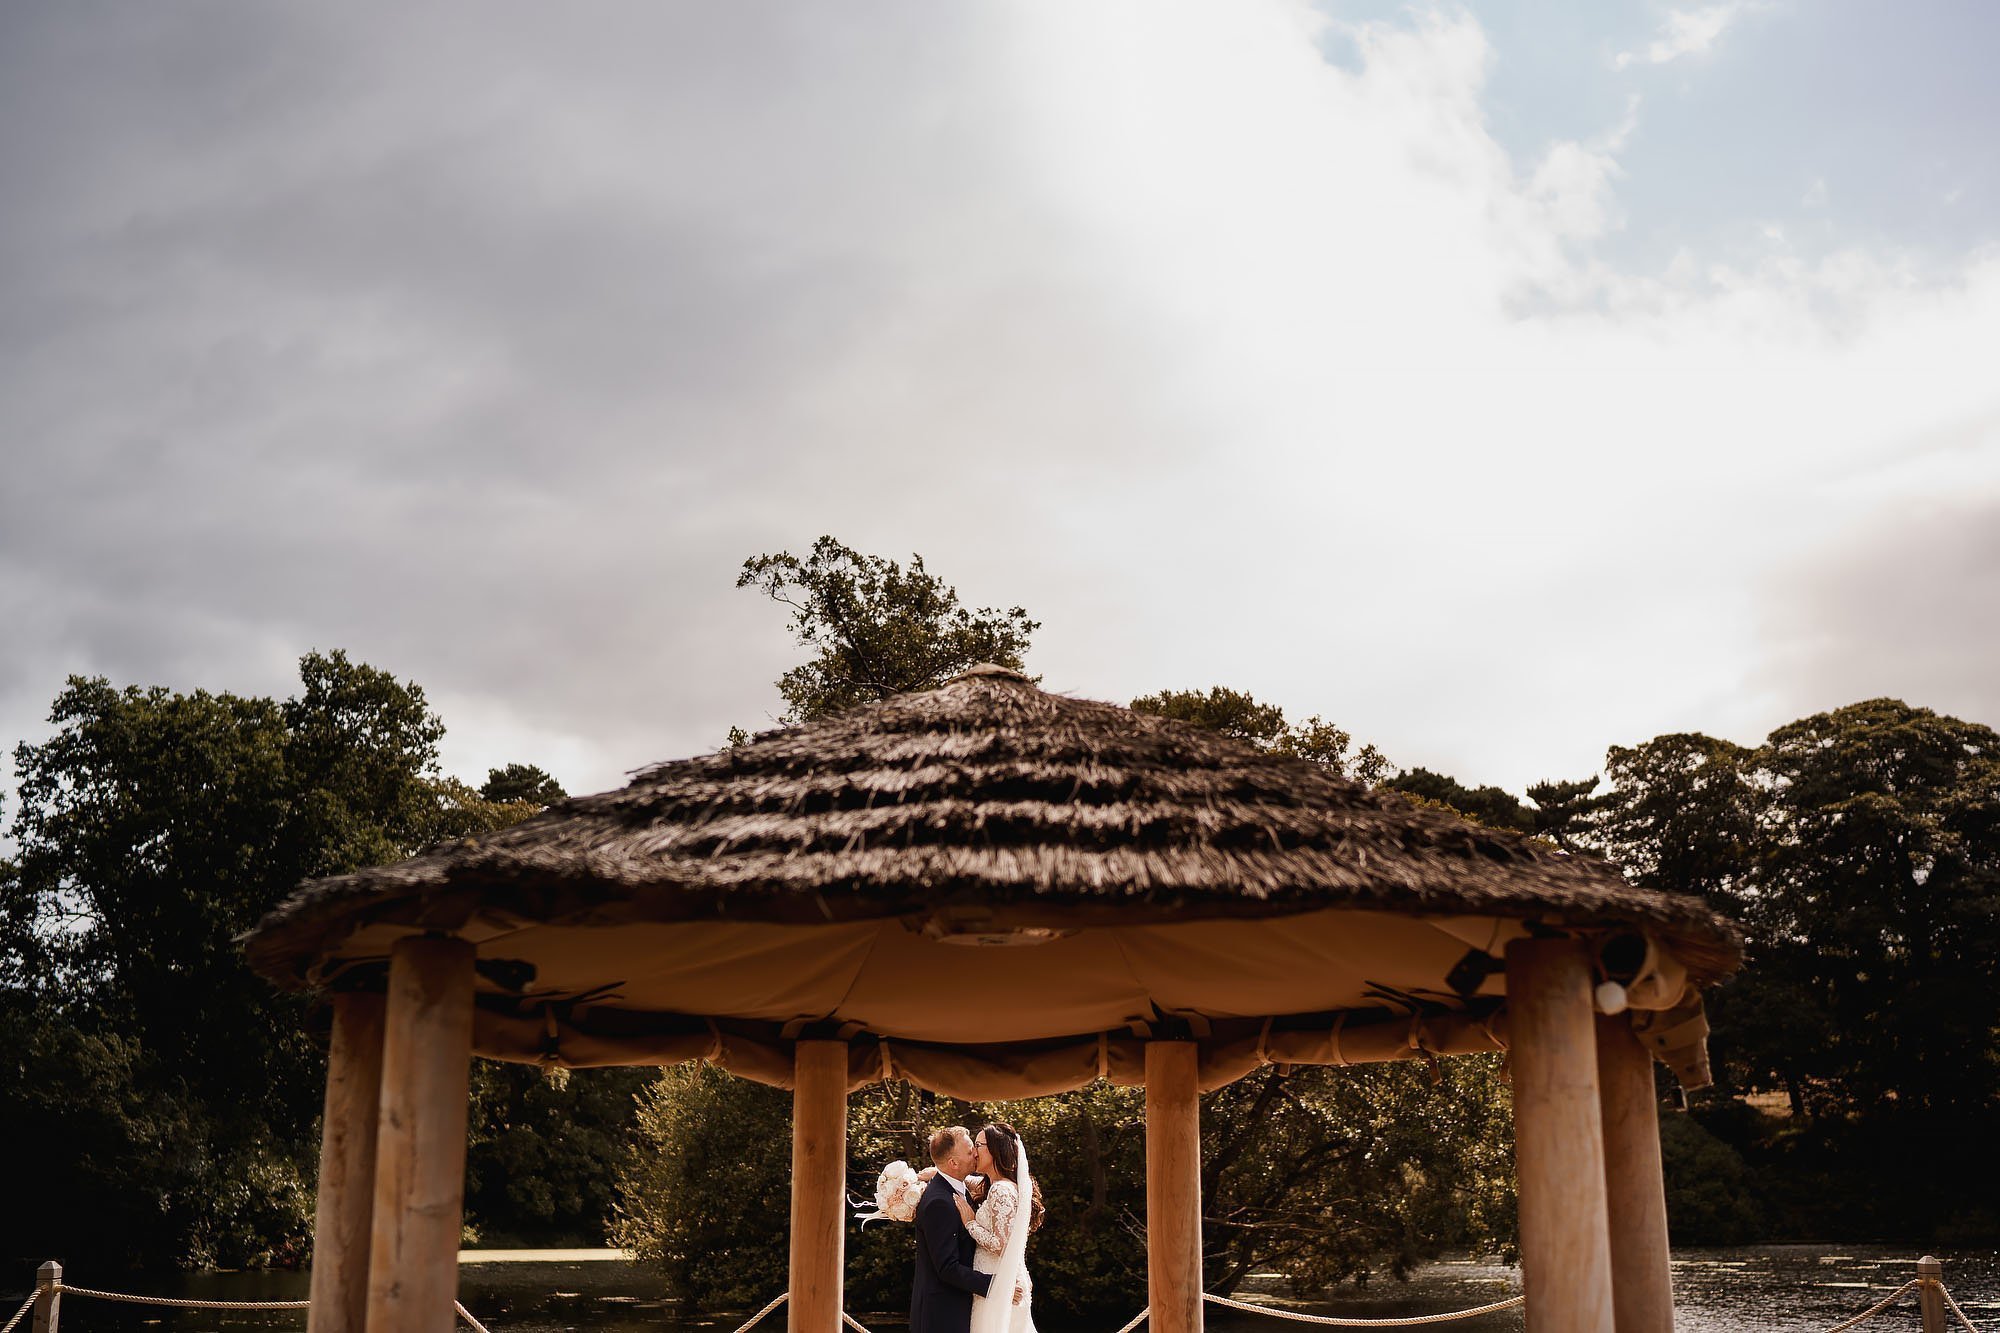 Delamere manor weddings by arj photography